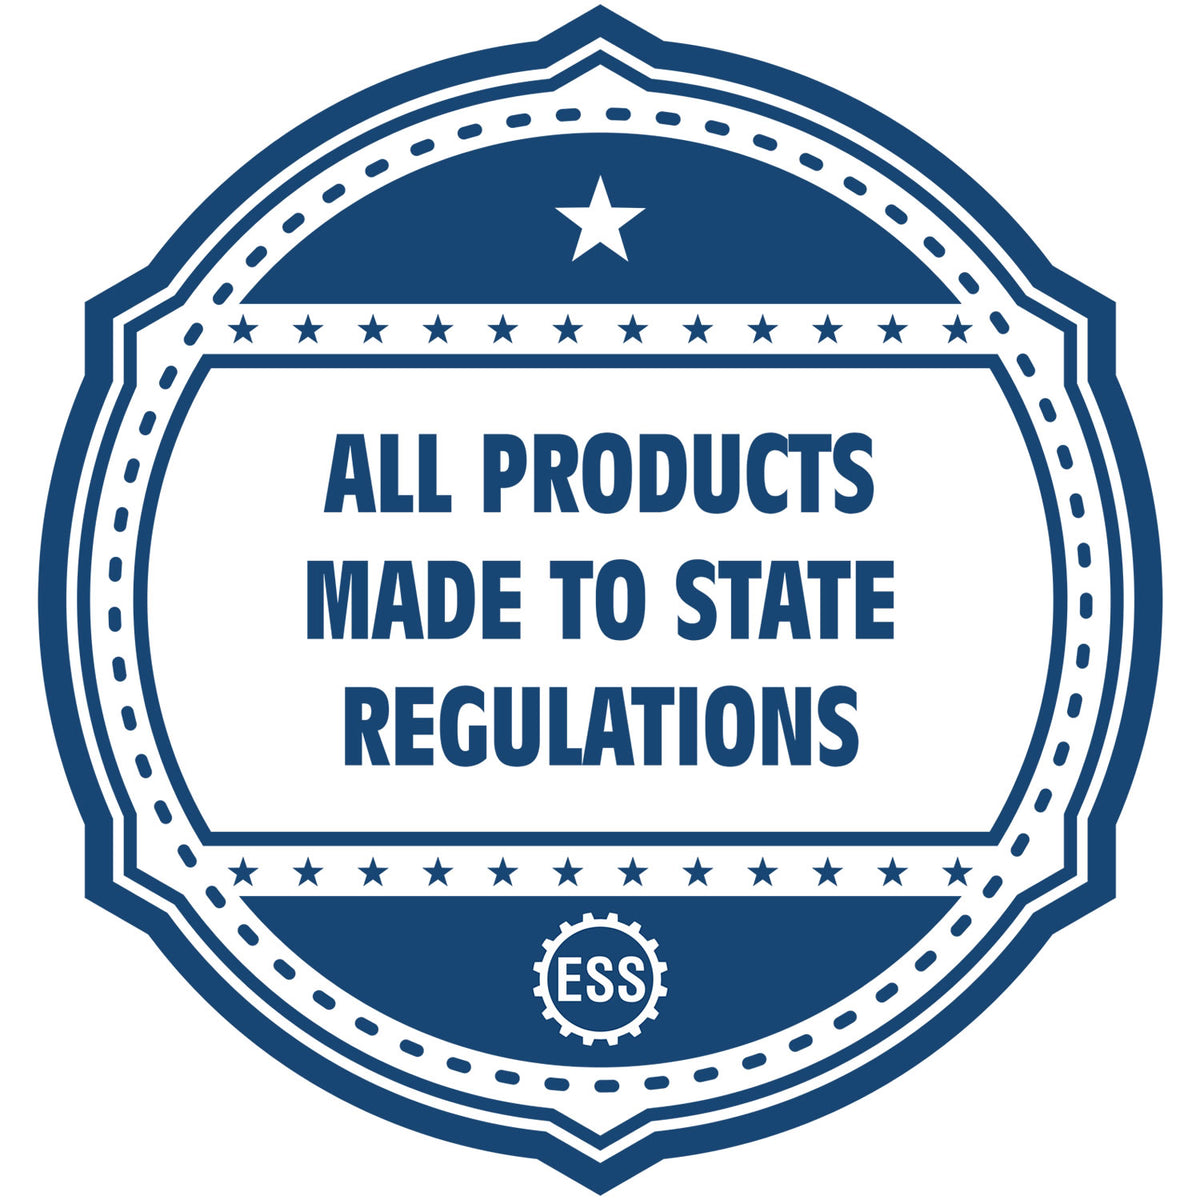 A blue icon or badge for the Gift Michigan Landscape Architect Seal showing that this product is made in compliance with state regulations.